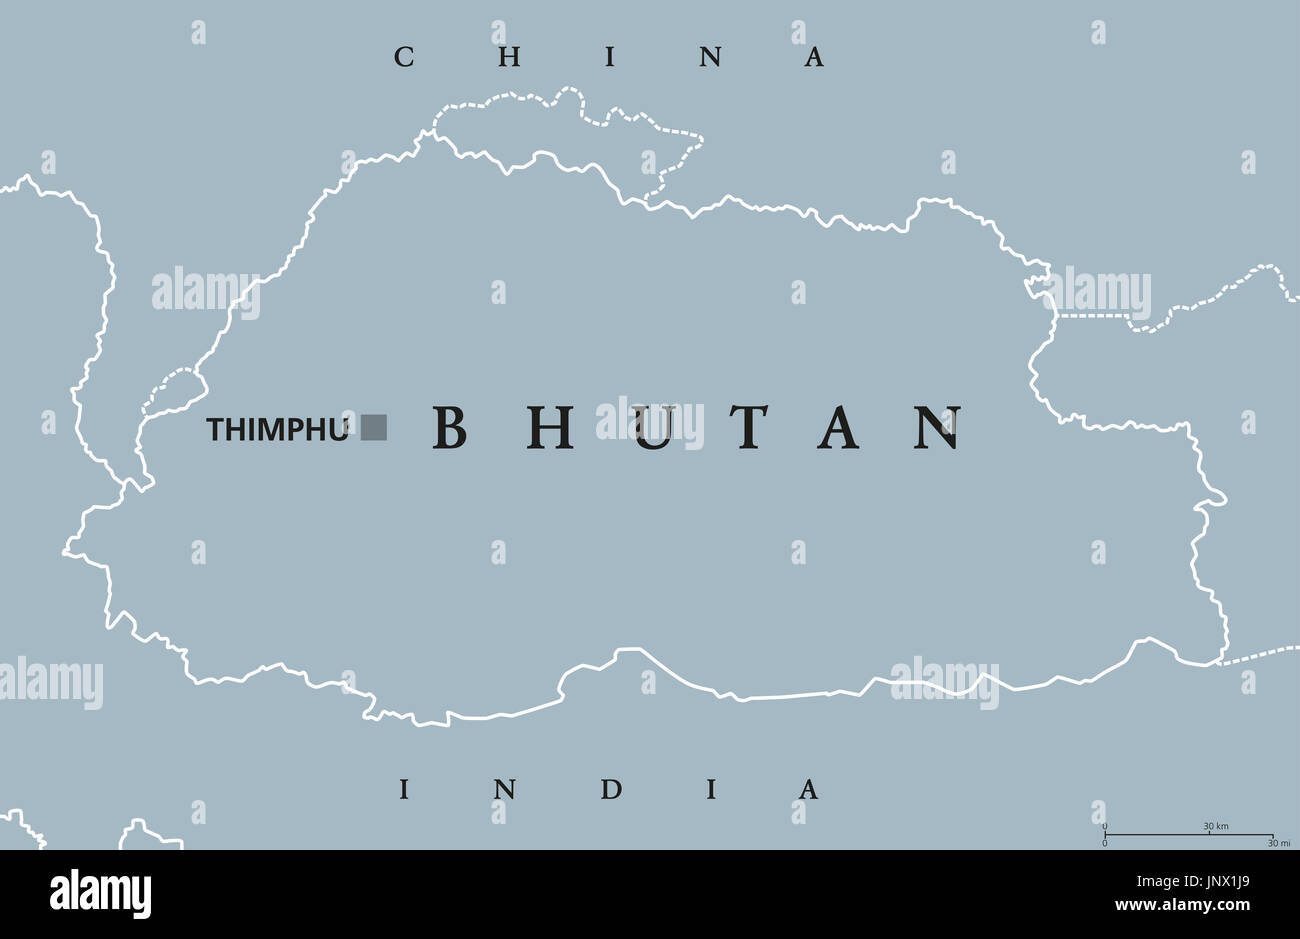 Bhutan political map with capital Thimphu and borders. English labeling. Landlocked kingdom in South Asia in the Eastern Himalayas. Illustration. Stock Photo